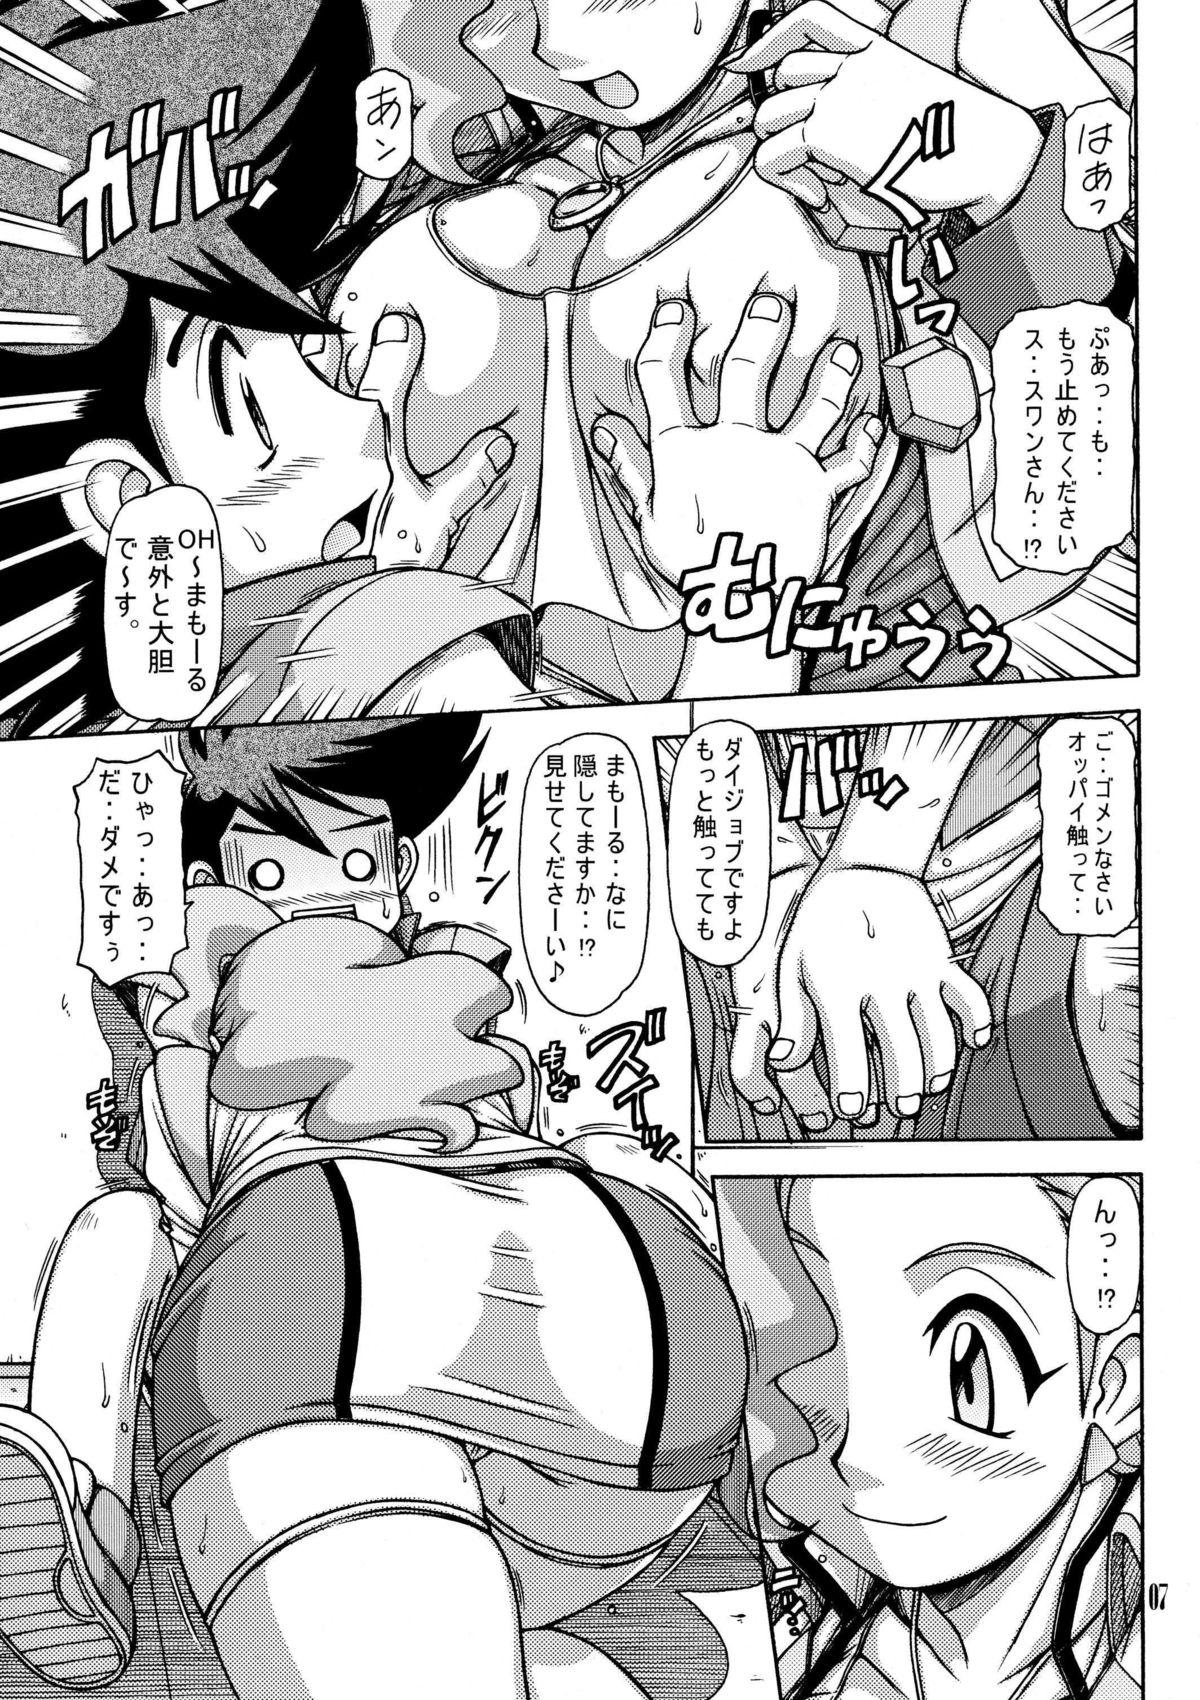 Famosa Red Muffler GGG - Gaogaigar Married - Page 6